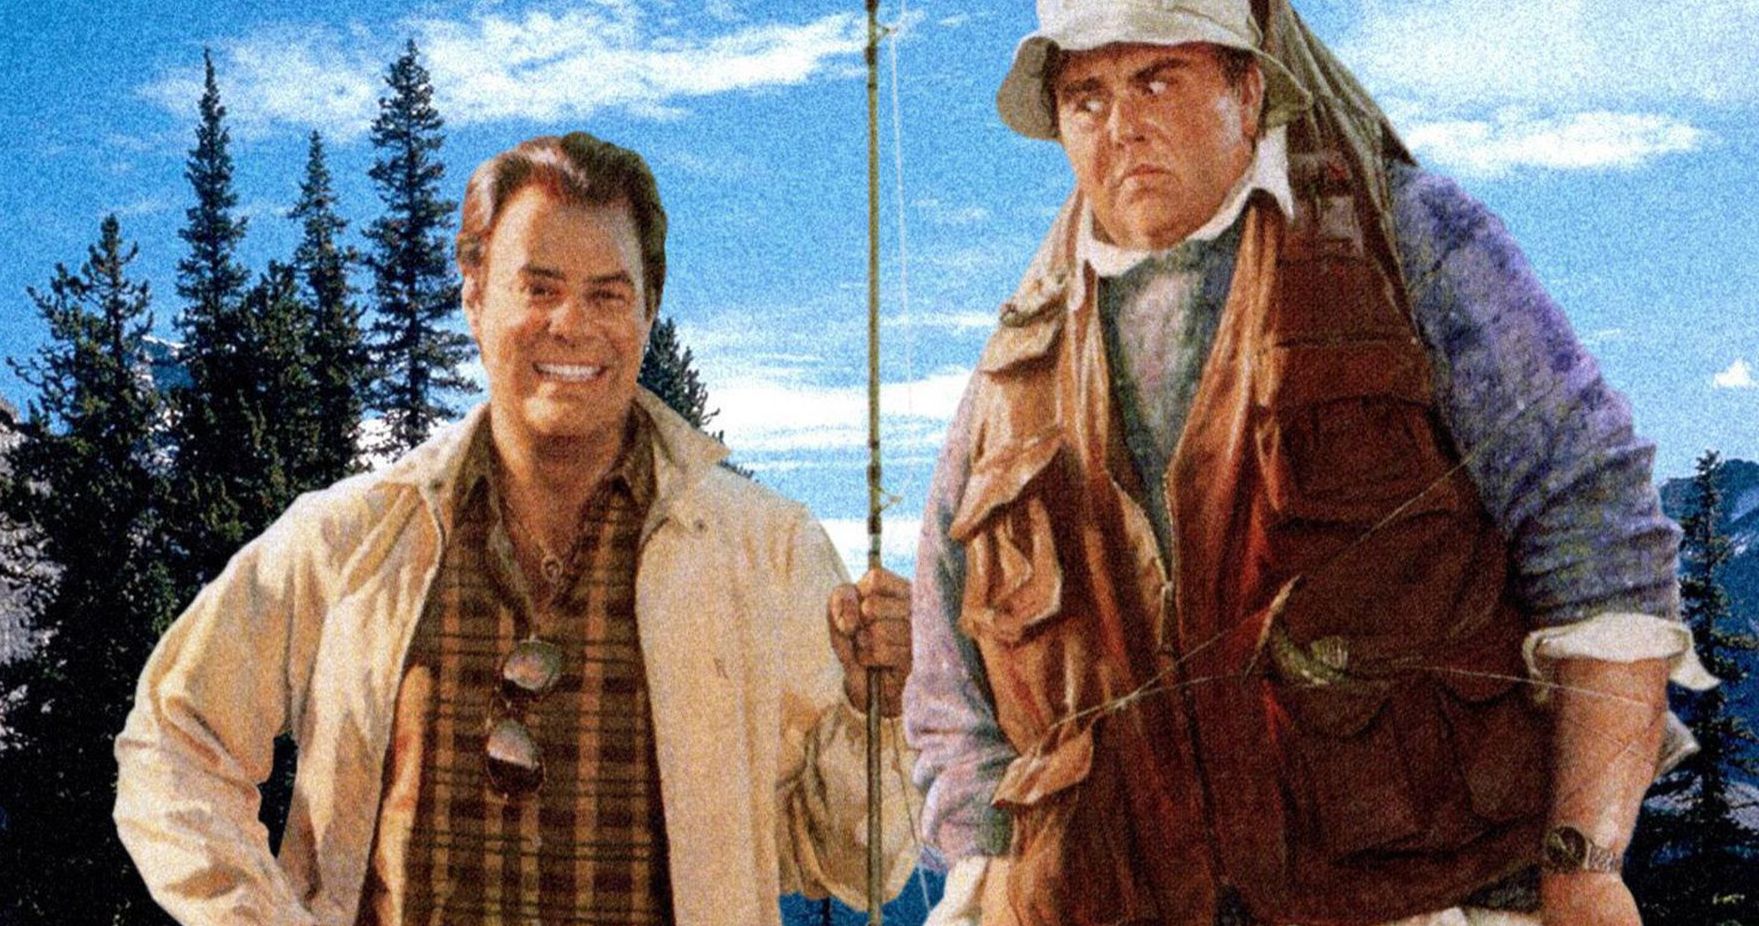 The Great Outdoors 2 Is Being Planned with Dan Aykroyd and Original Director Howard Deutch